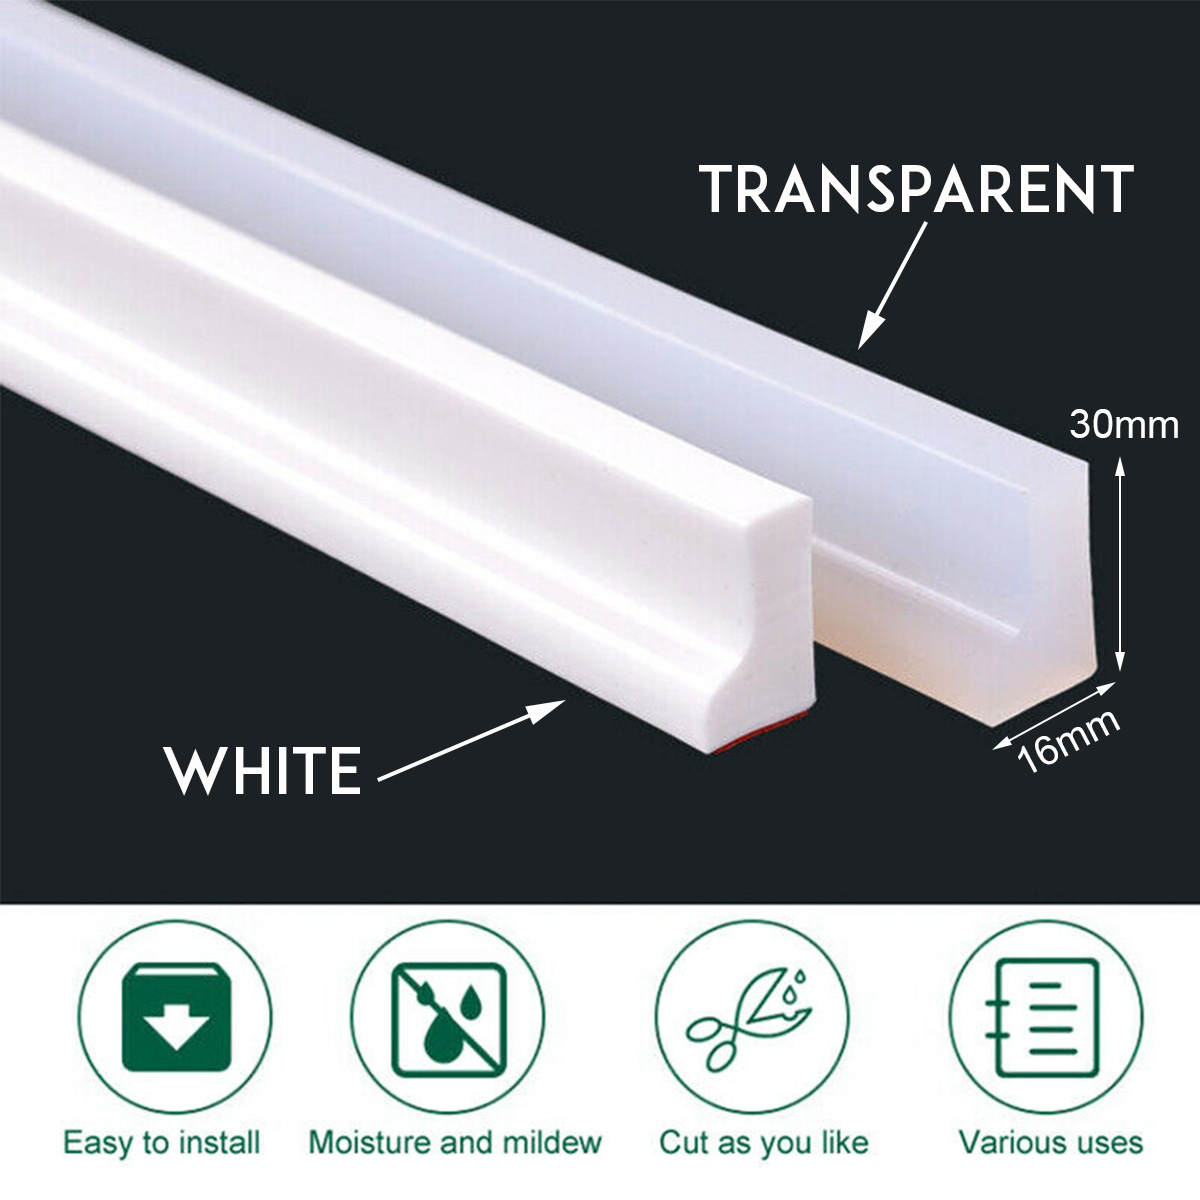 Bathroom-Kitchen-Foldable-Water-Stopper-Self-adhesive-Rubber-Dam-Shower-Barrier-WhiteTransparent-1759927-2